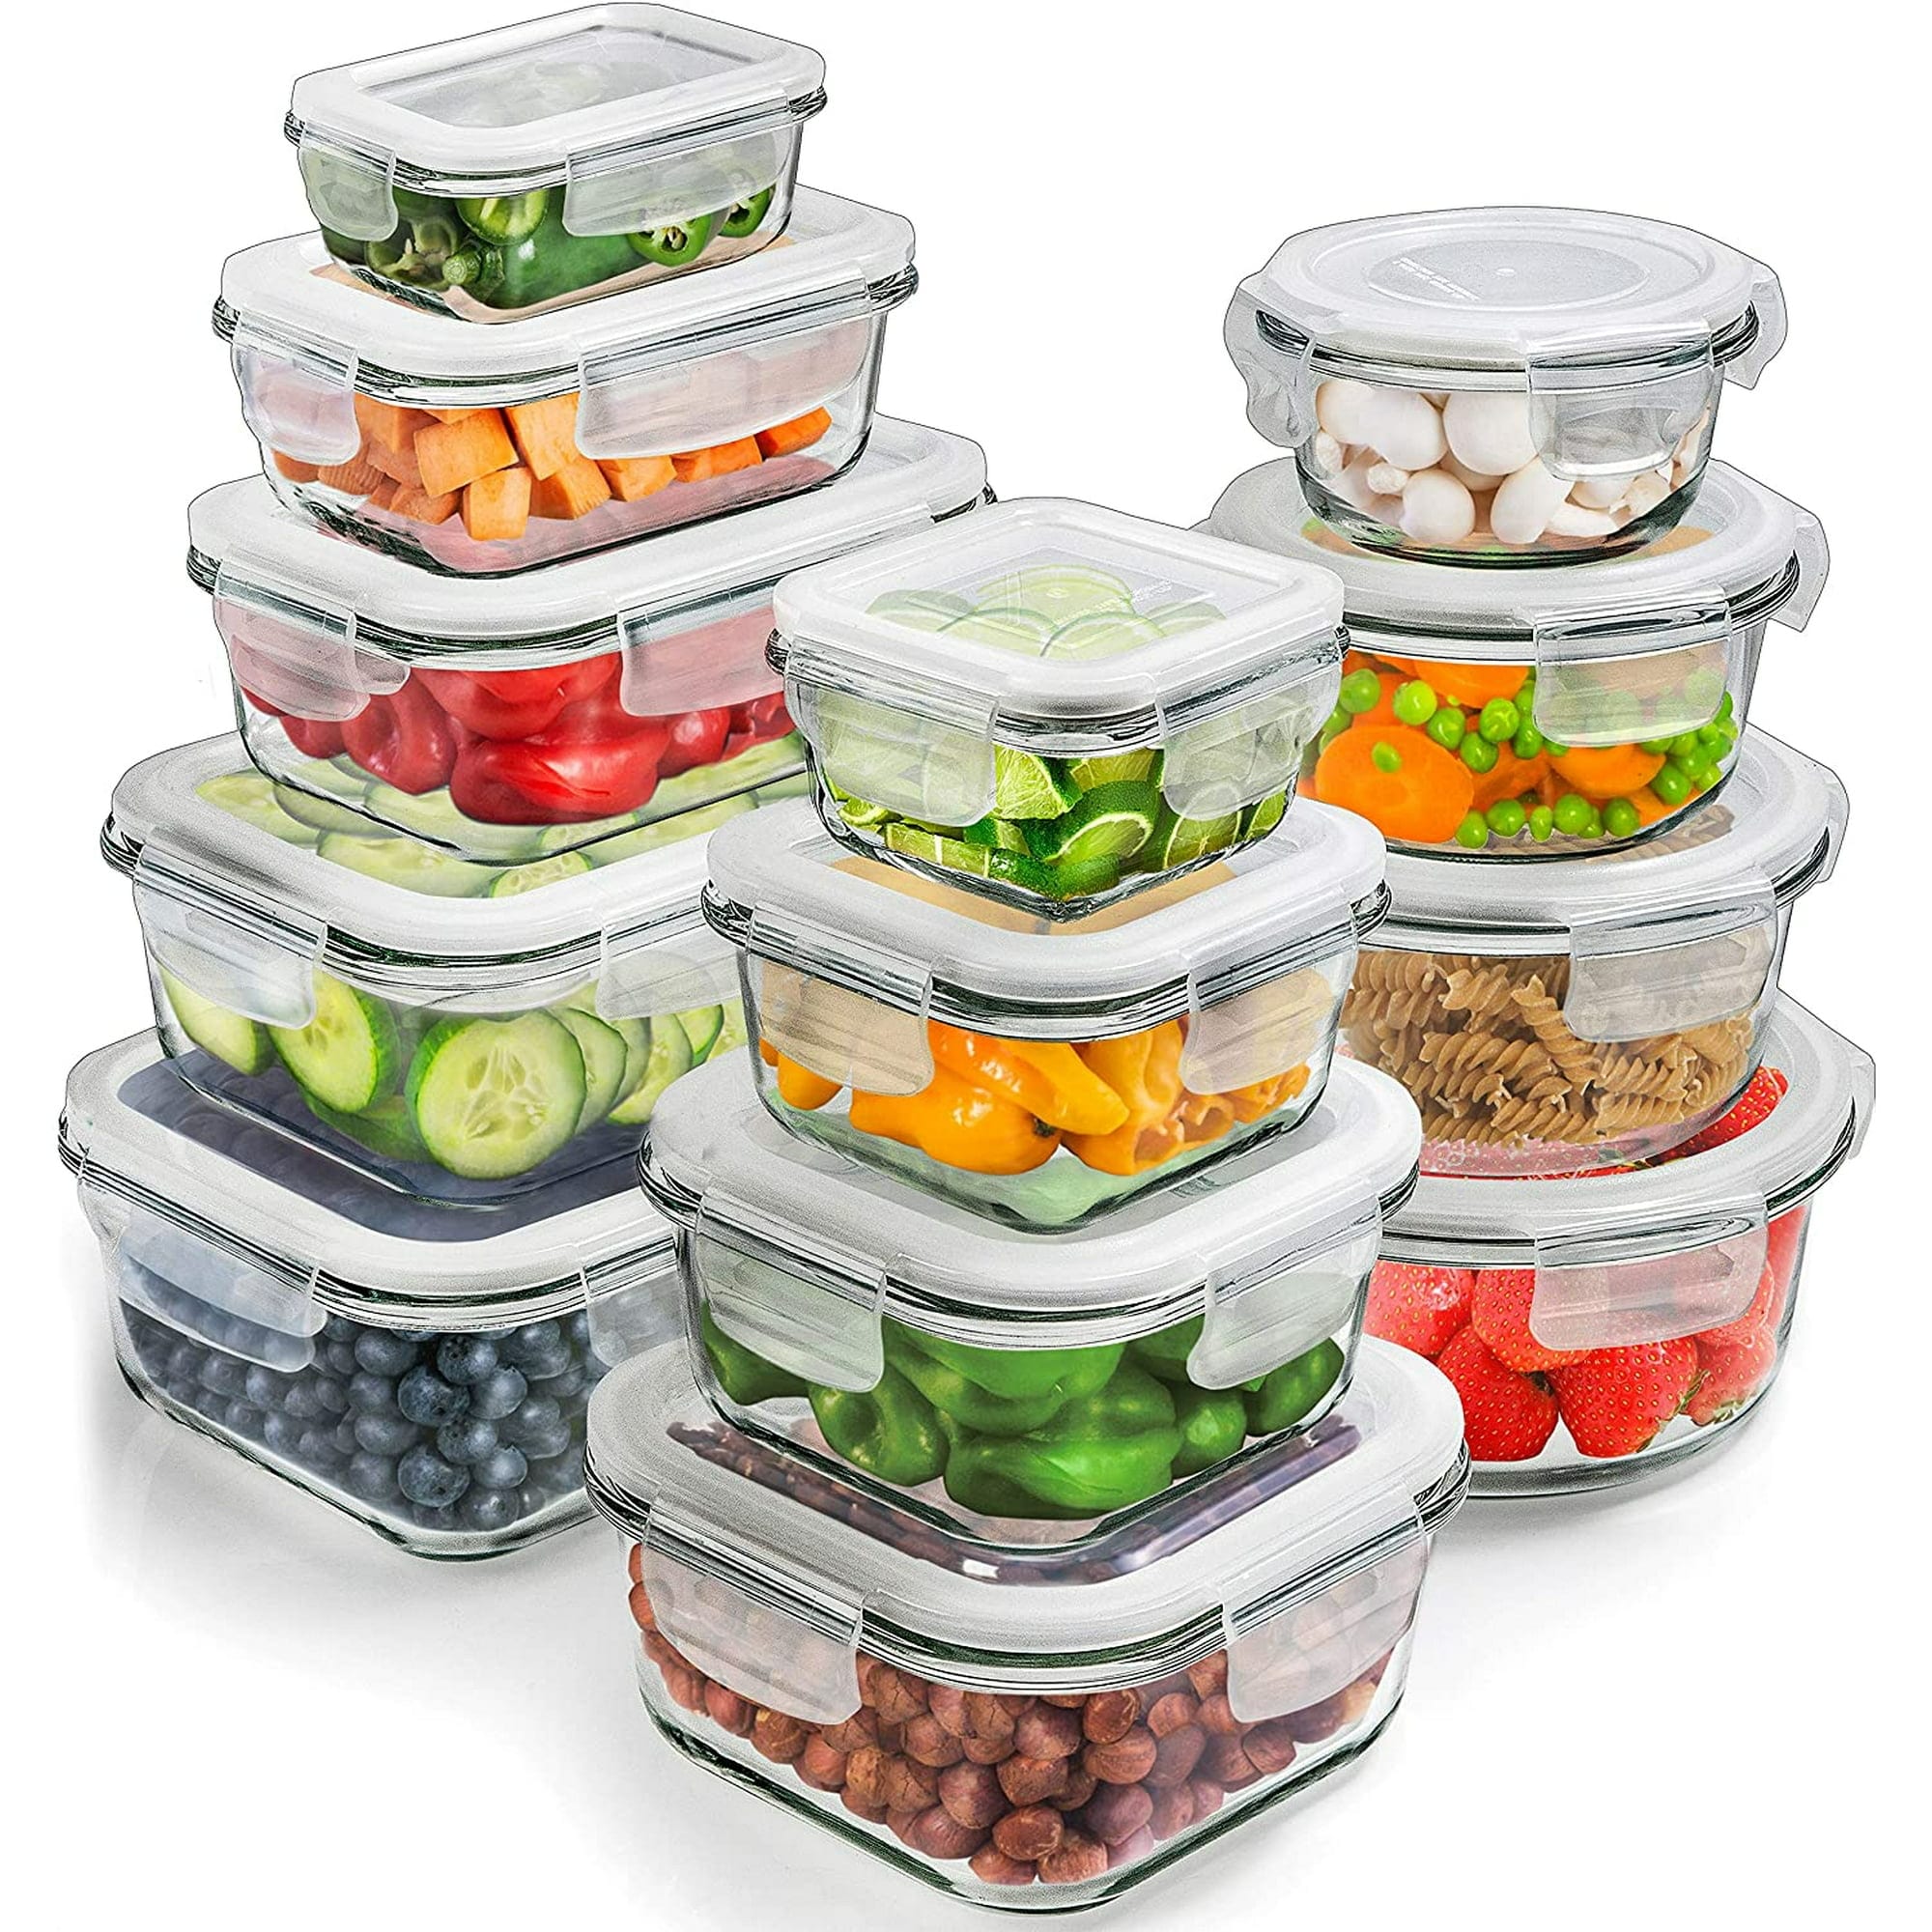 https://ak1.ostkcdn.com/images/products/is/images/direct/96058e440ad3f1e8c57bf148f504997f74e27057/Glass-food-storage-containers.jpg